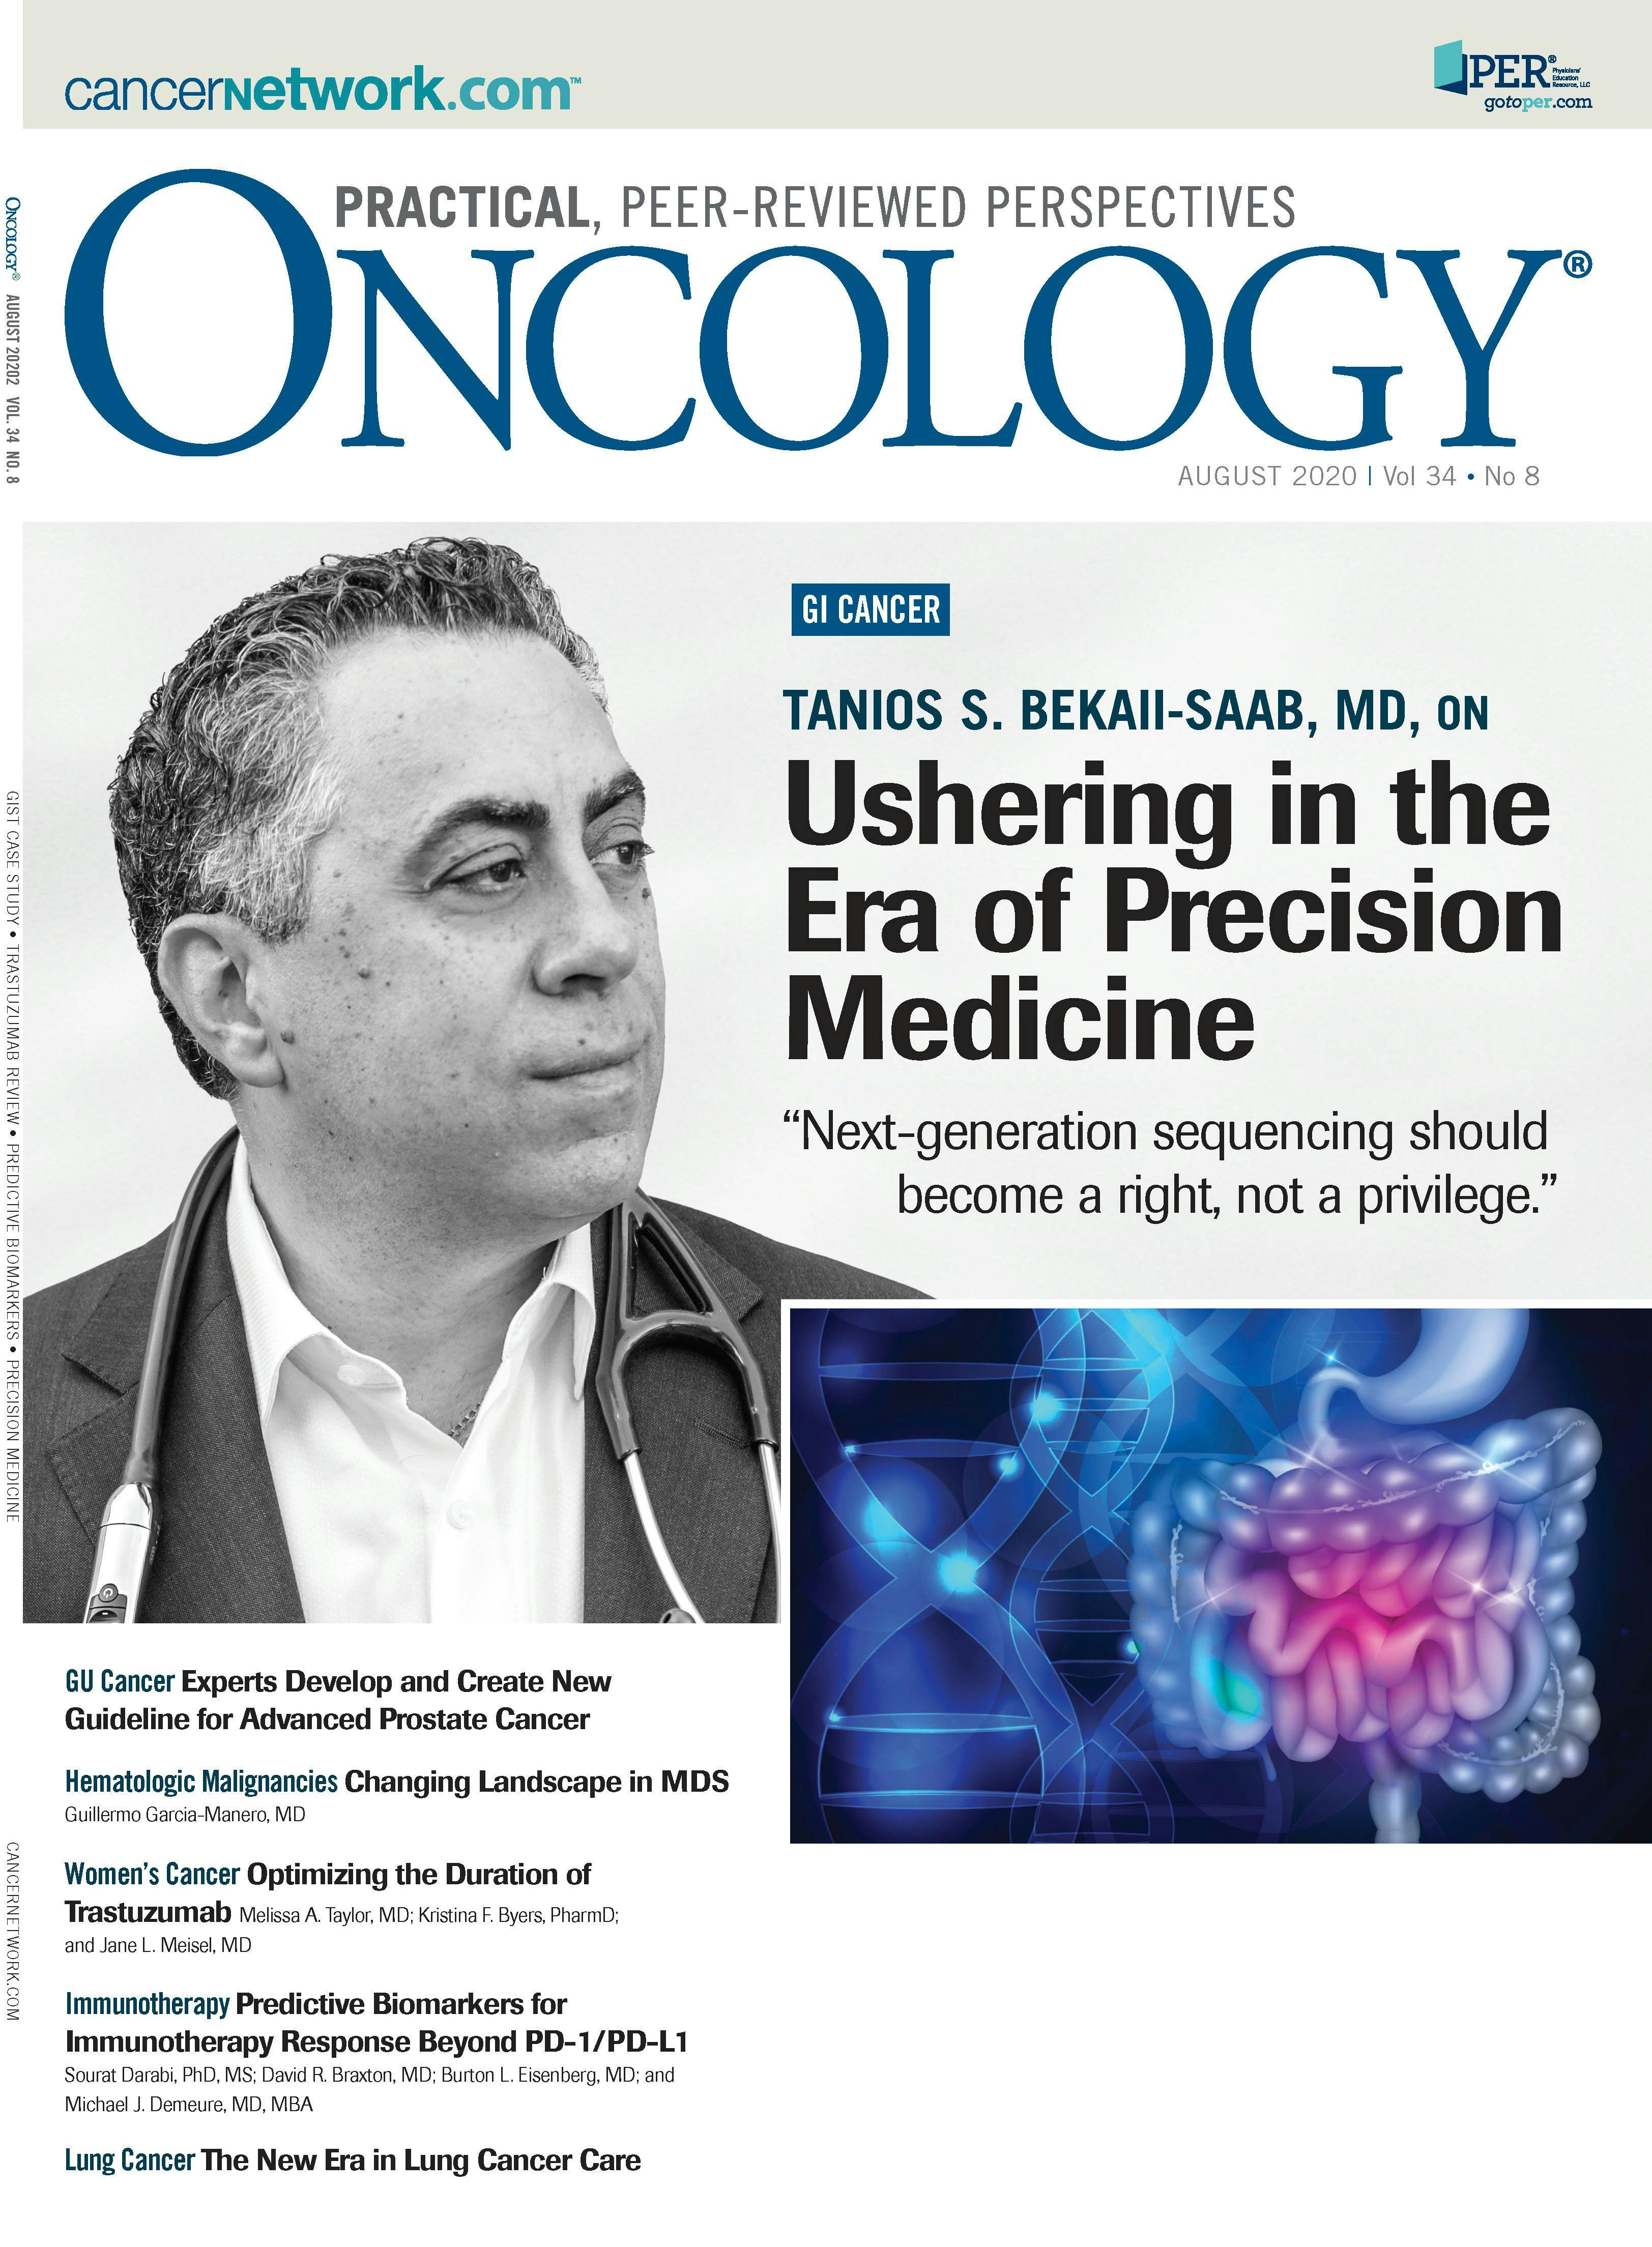 ONCOLOGY Vol 34 Issue 8